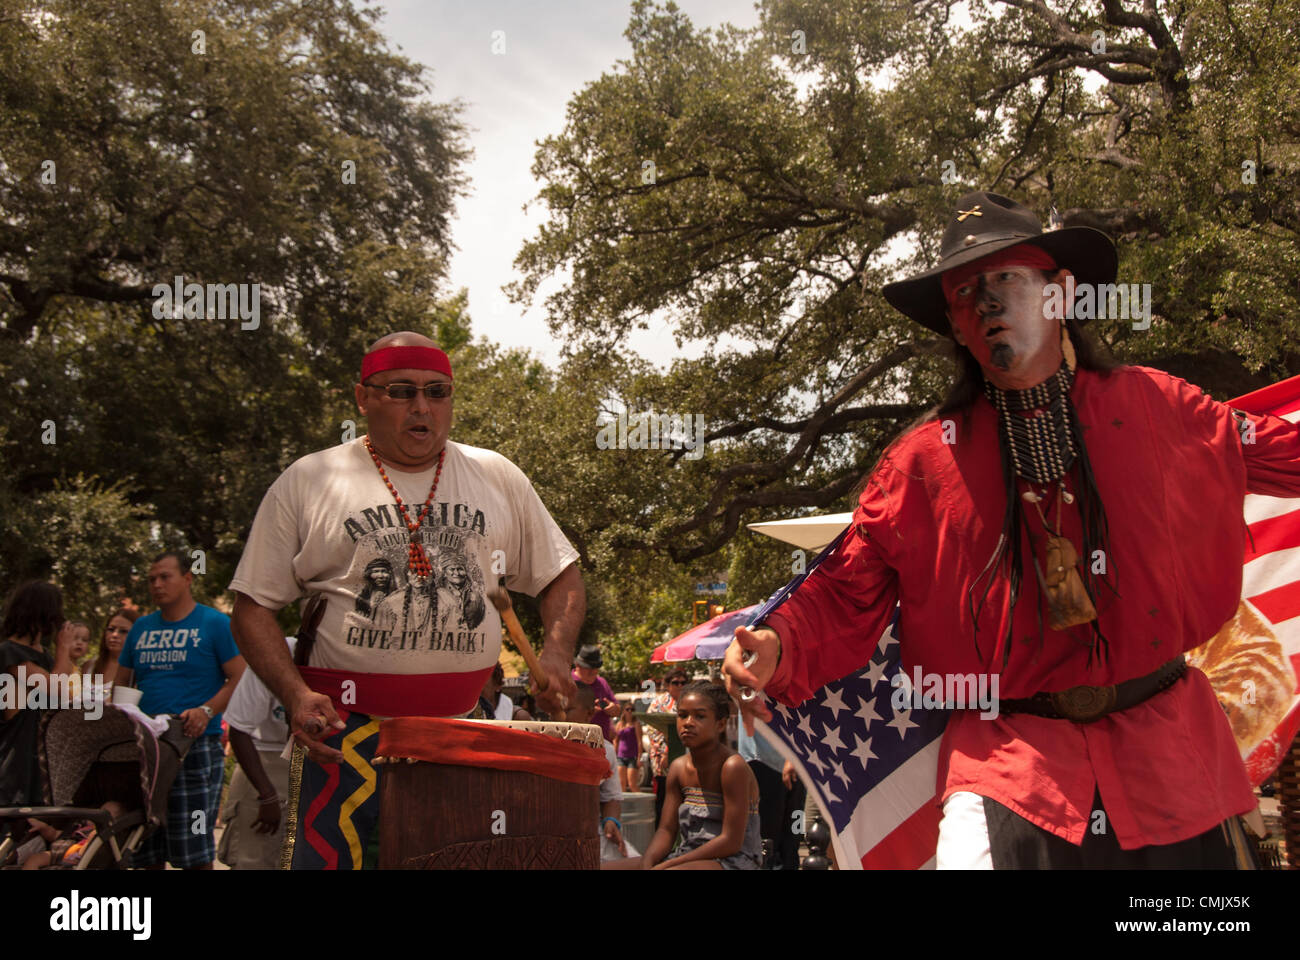 18 August 2012 San Antonio, Texas, USA - Native Americans from the Pacuache-Tilijaya Coahuilteca Tribe of Tejas, perform a traditional dance at Alamo Plaza in front of the Alamo. Stock Photo